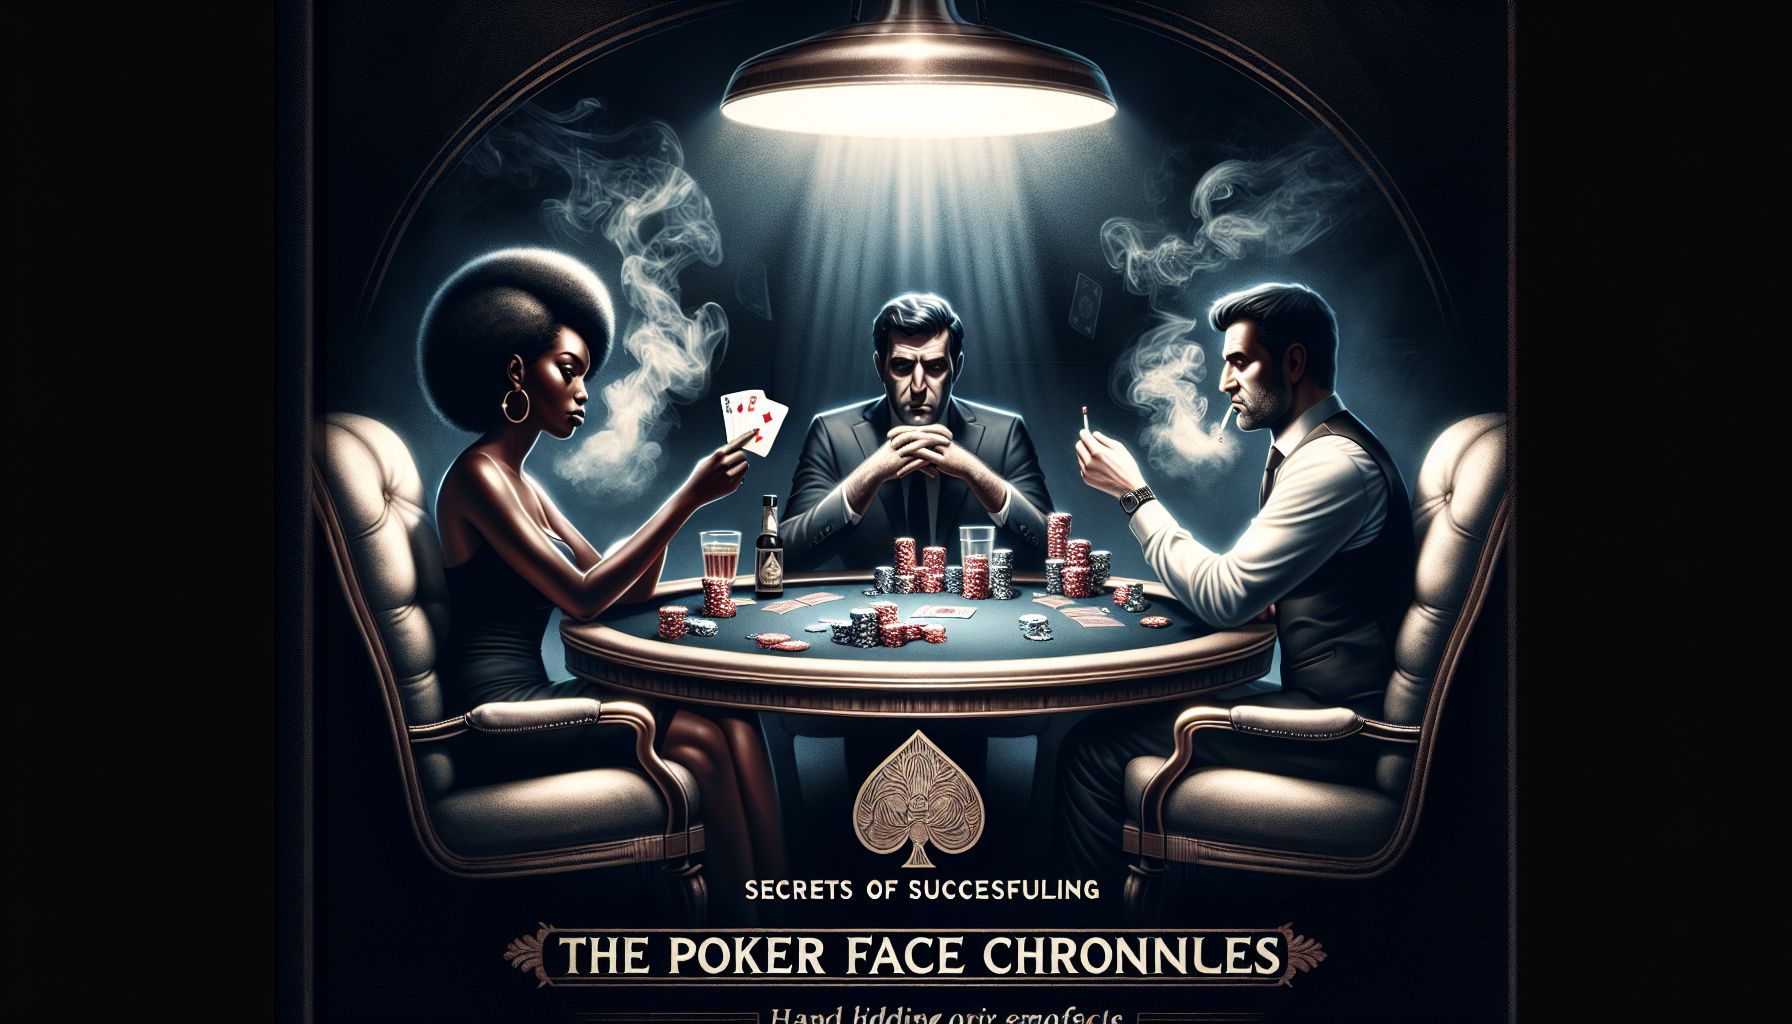 **The Poker Face Chronicles: Secrets of Successful Bluffing**